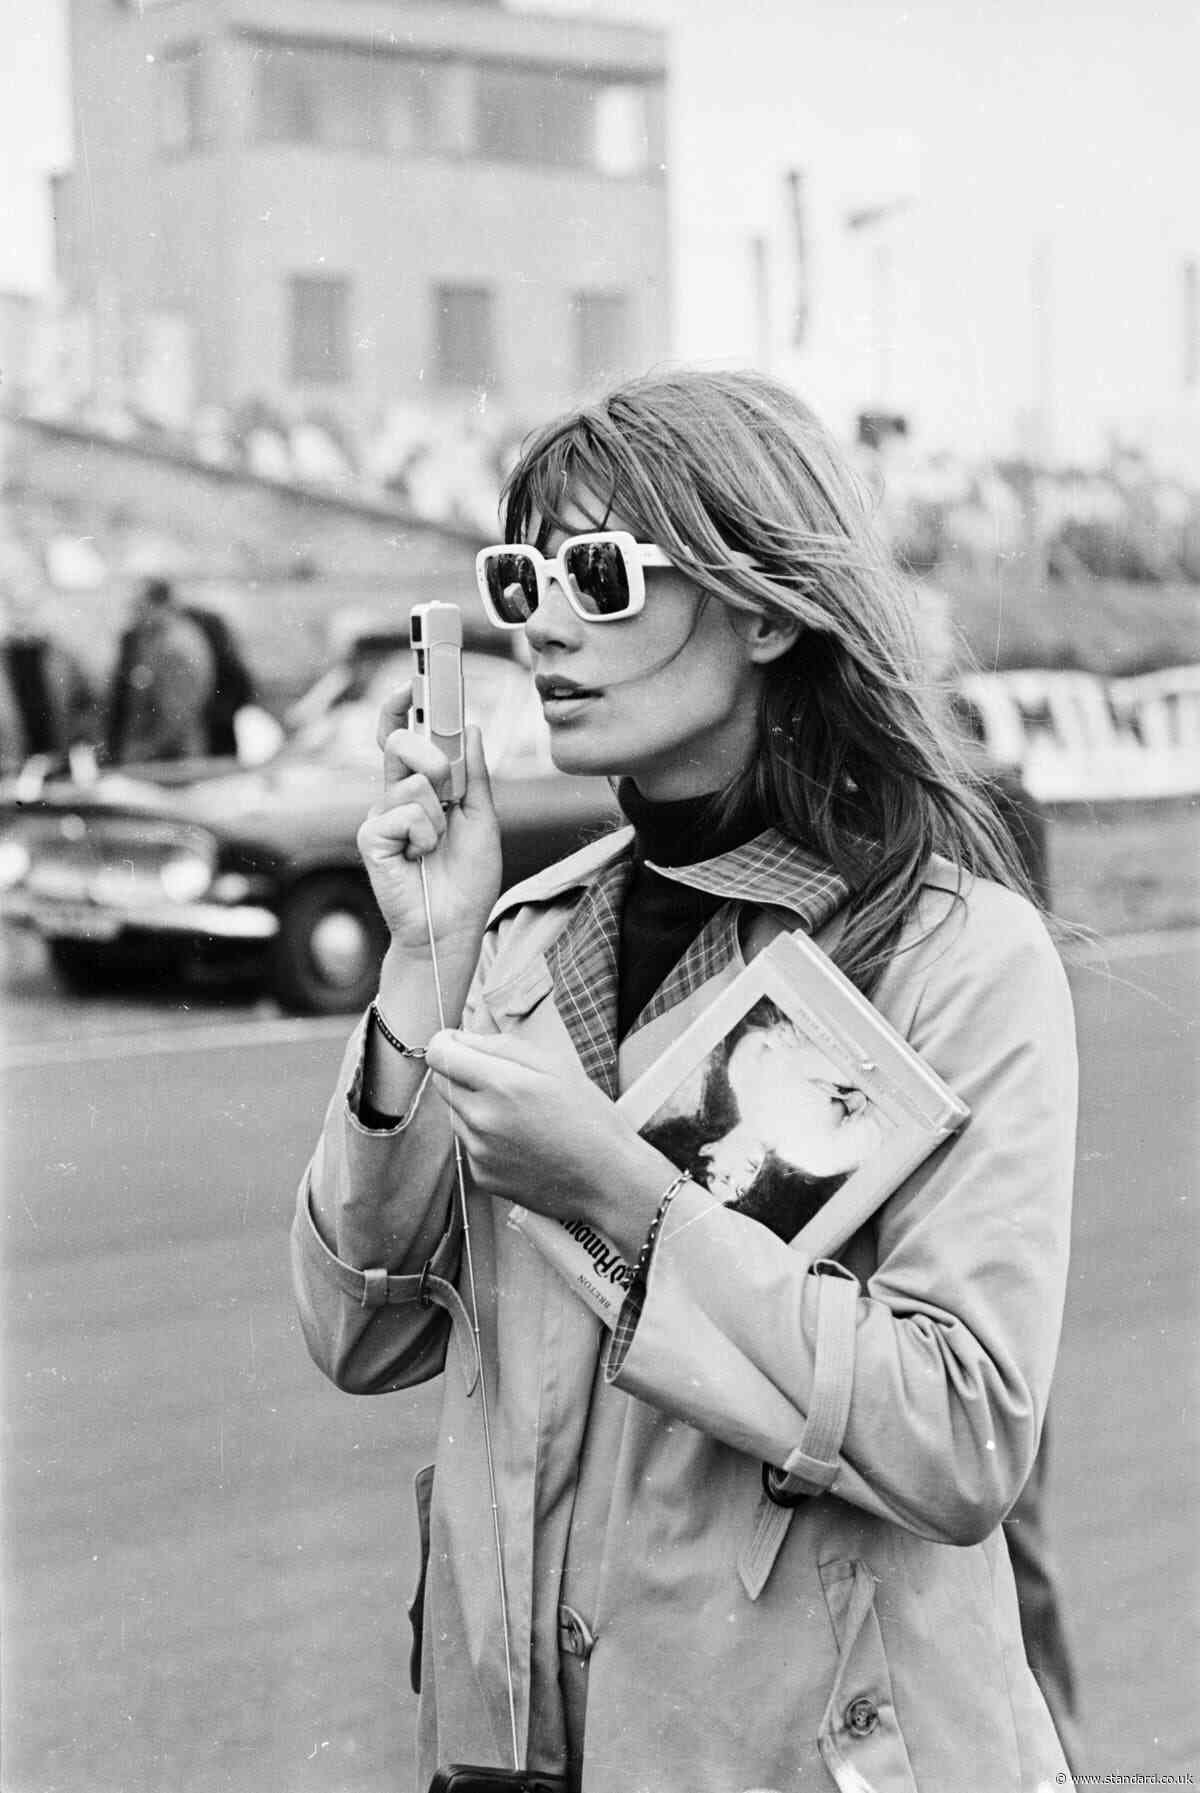 Françoise Hardy's life in looks — the star who set the eternal style tone for French fashion